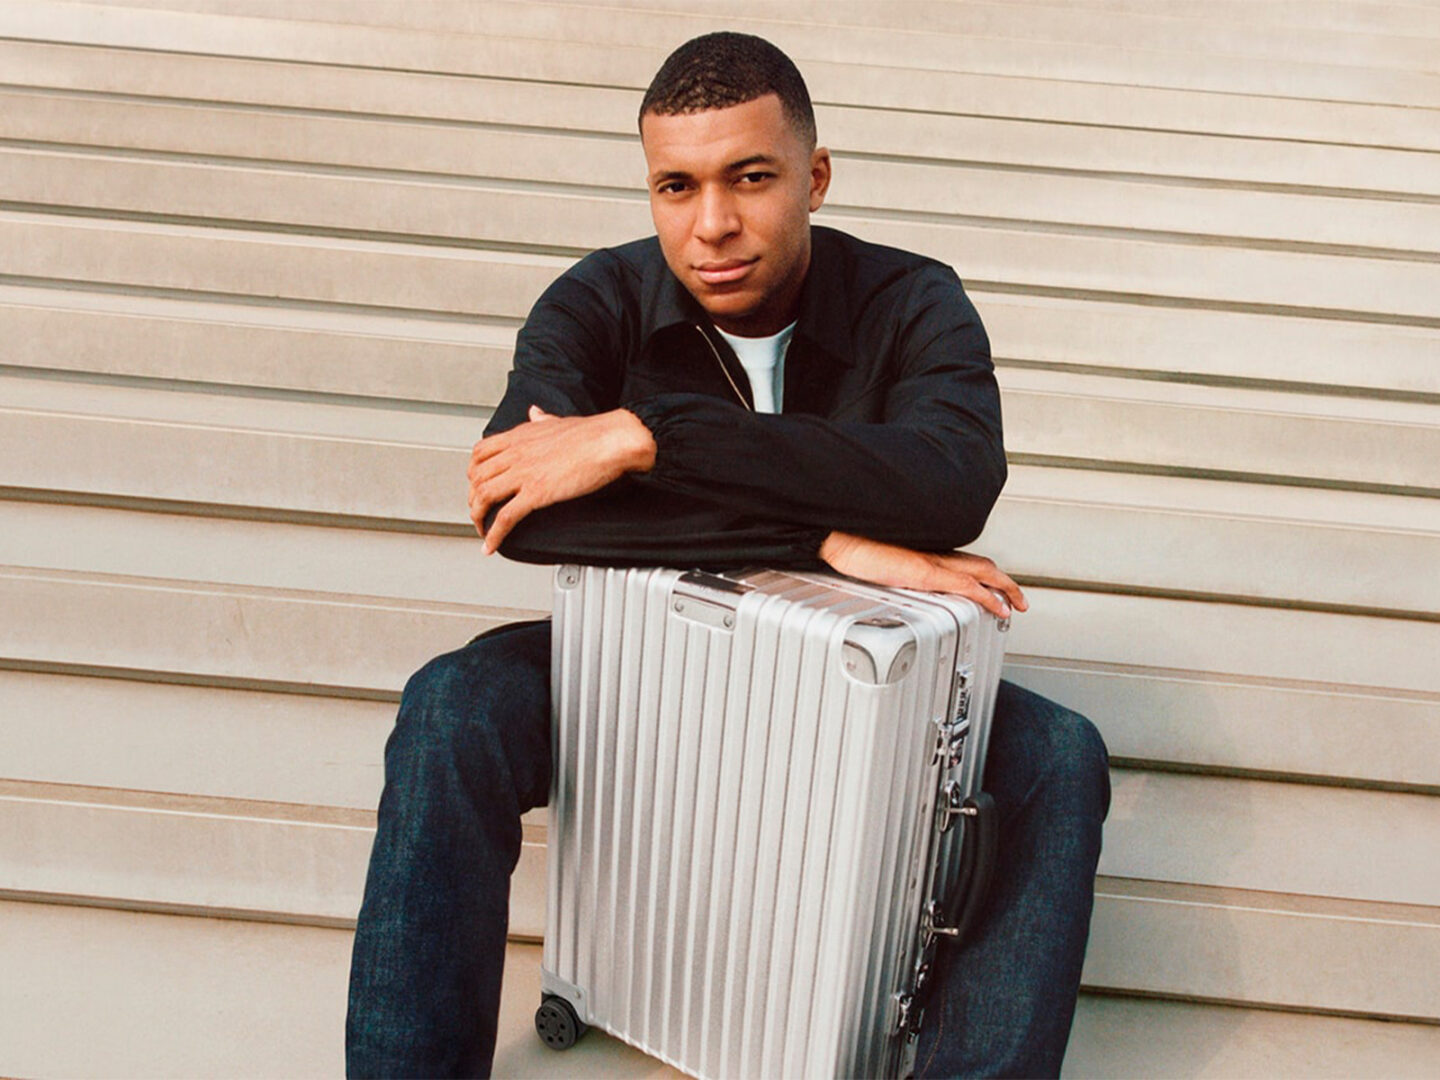 RIMOWA brings together Mbappé, Hamilton and Rosé in latest campaign